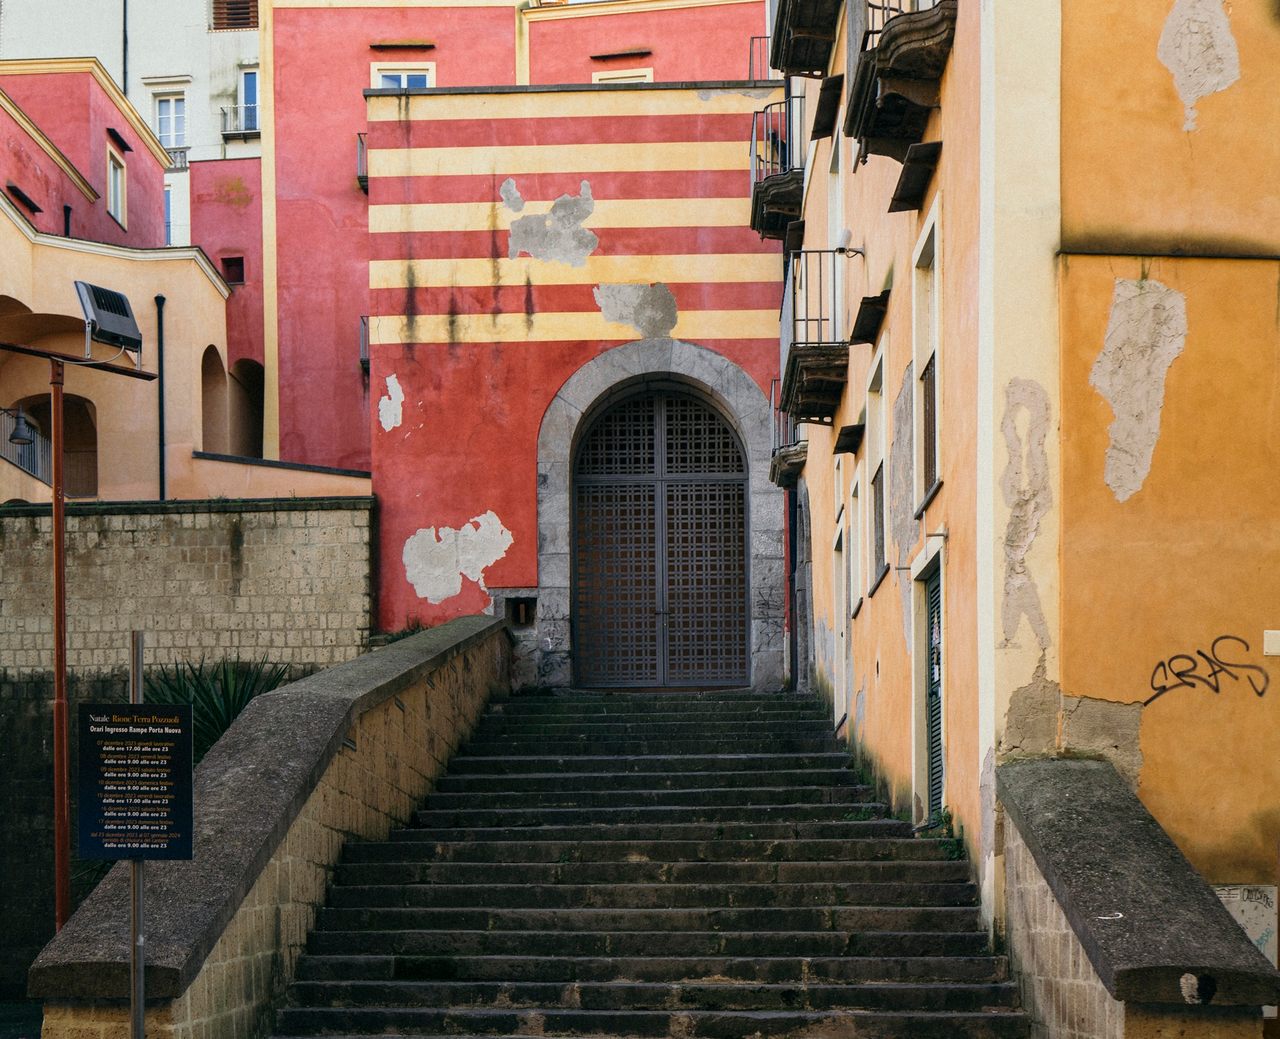 The beautiful Italian town has been left deserted since the '70s due to an aborted eruption.